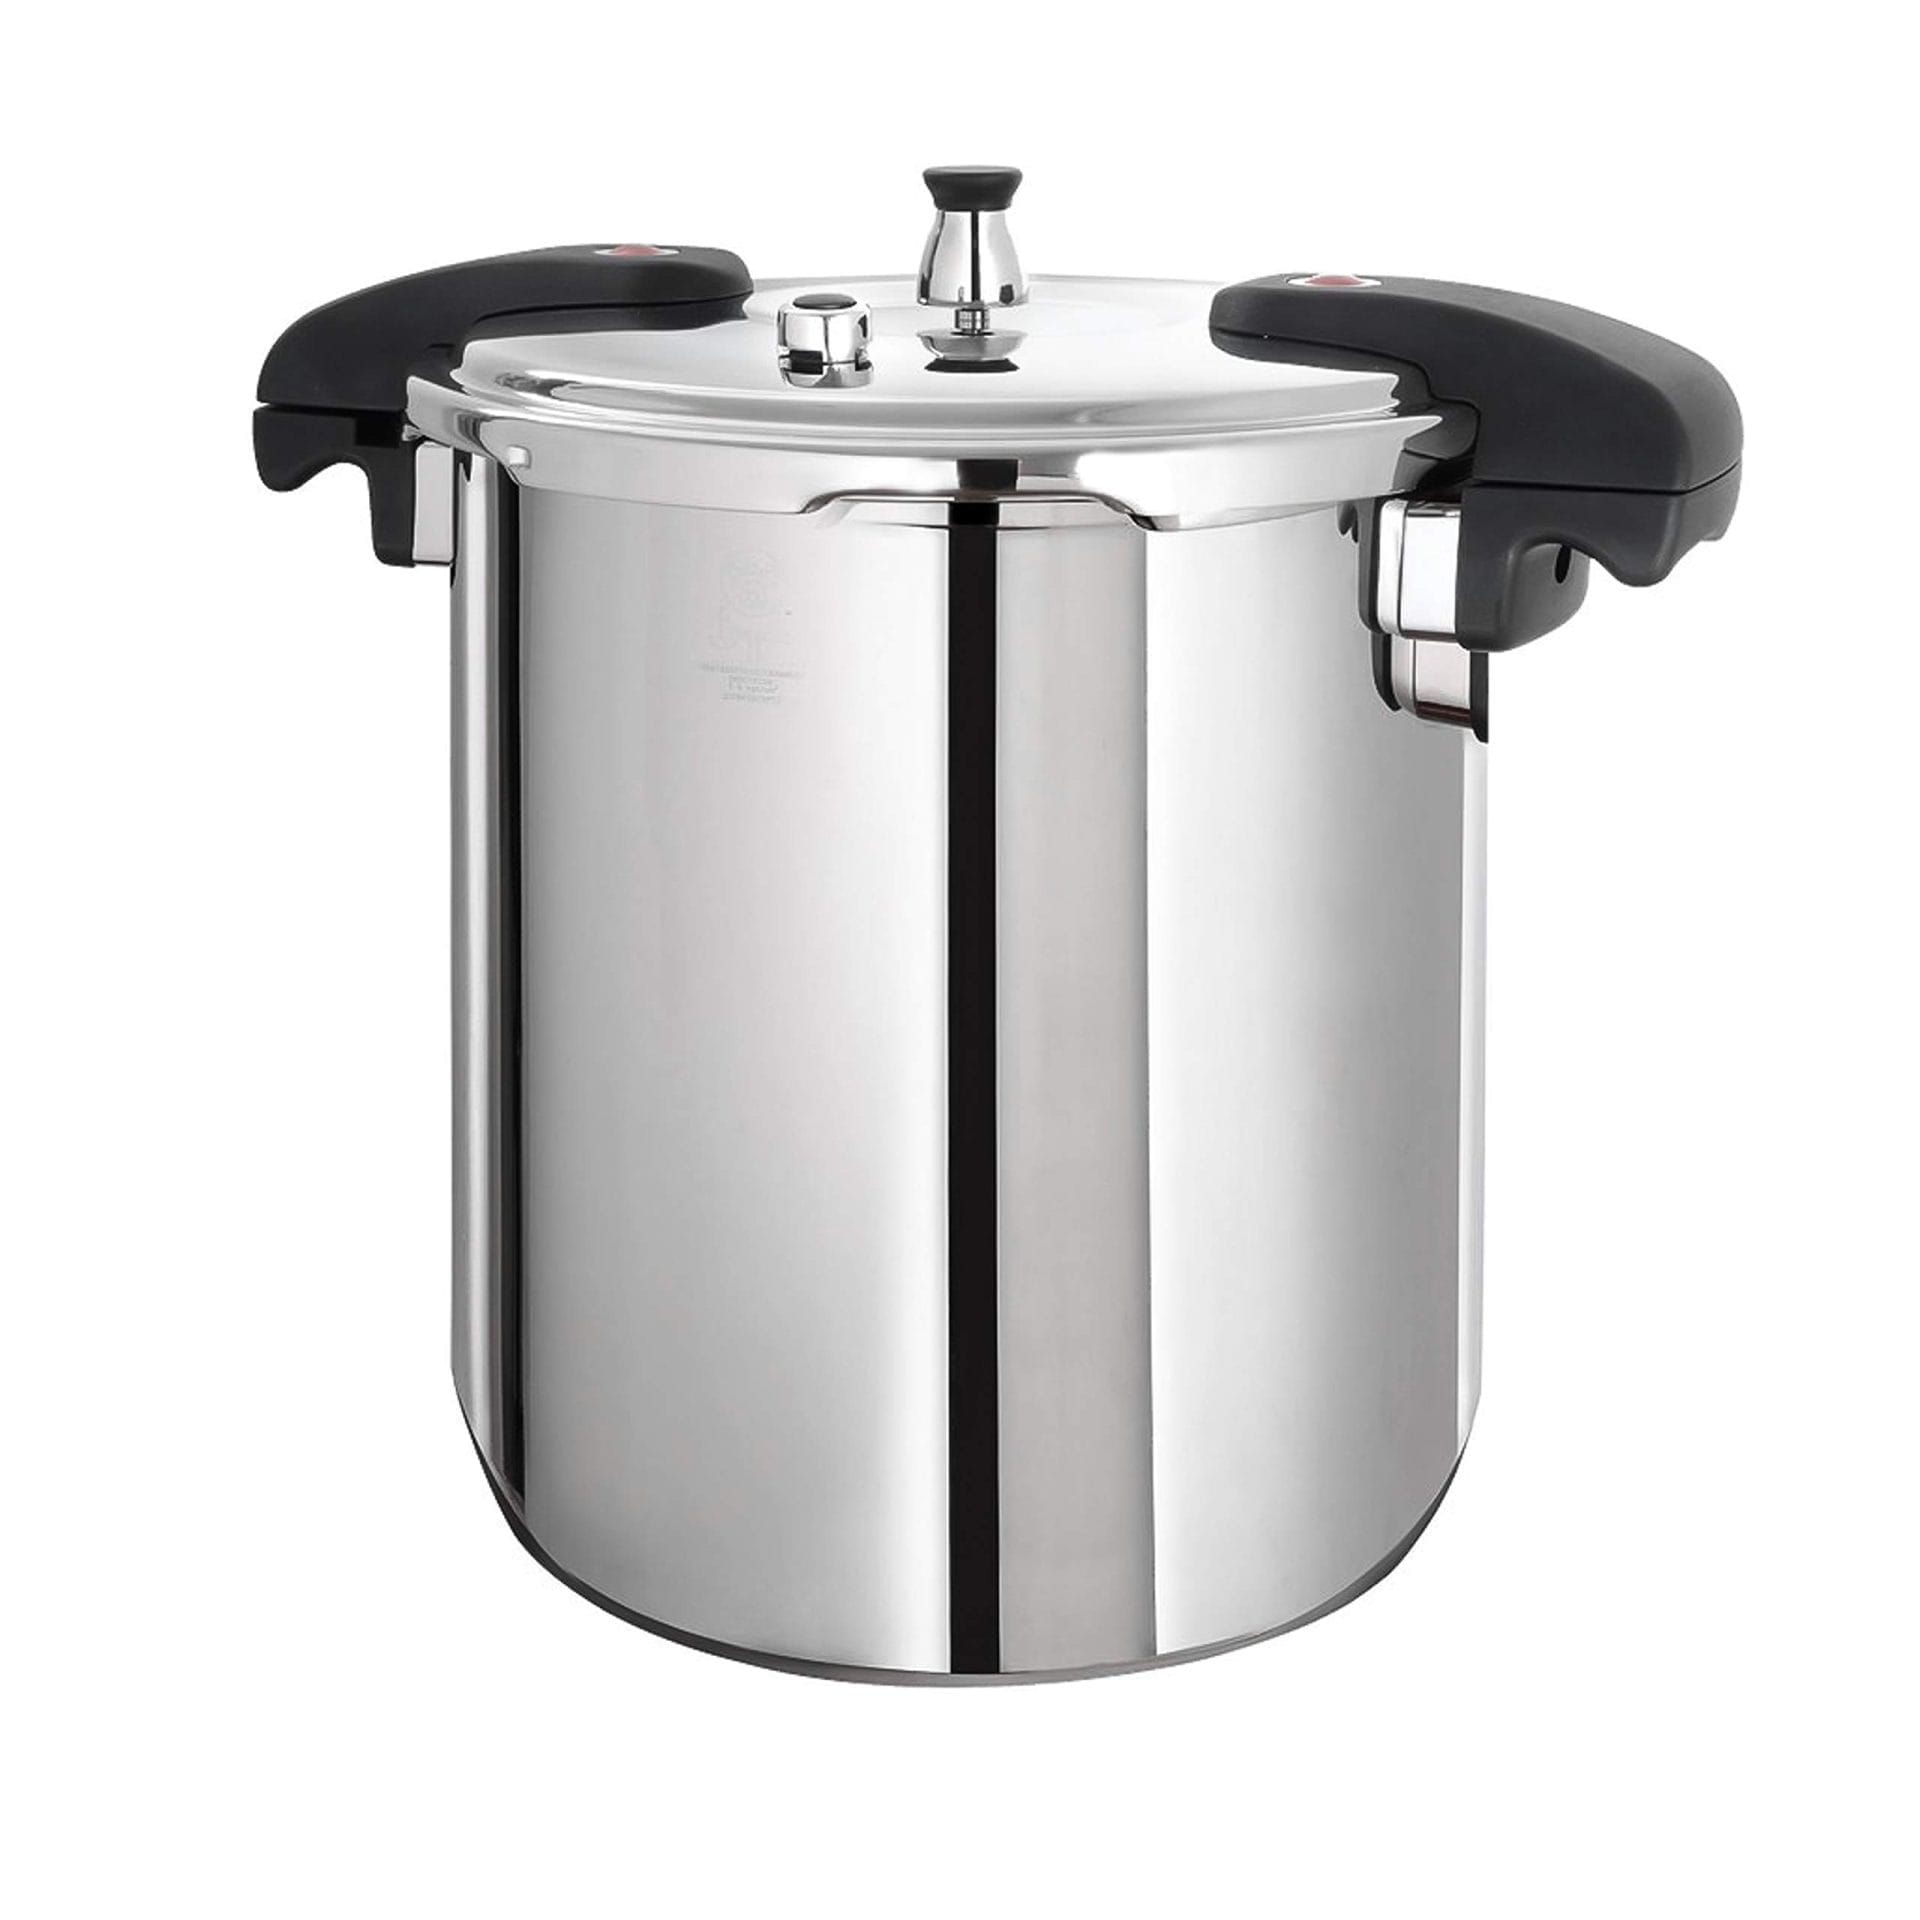 10 best stainless steel pressure cookers tested reviewed 1145 29 11